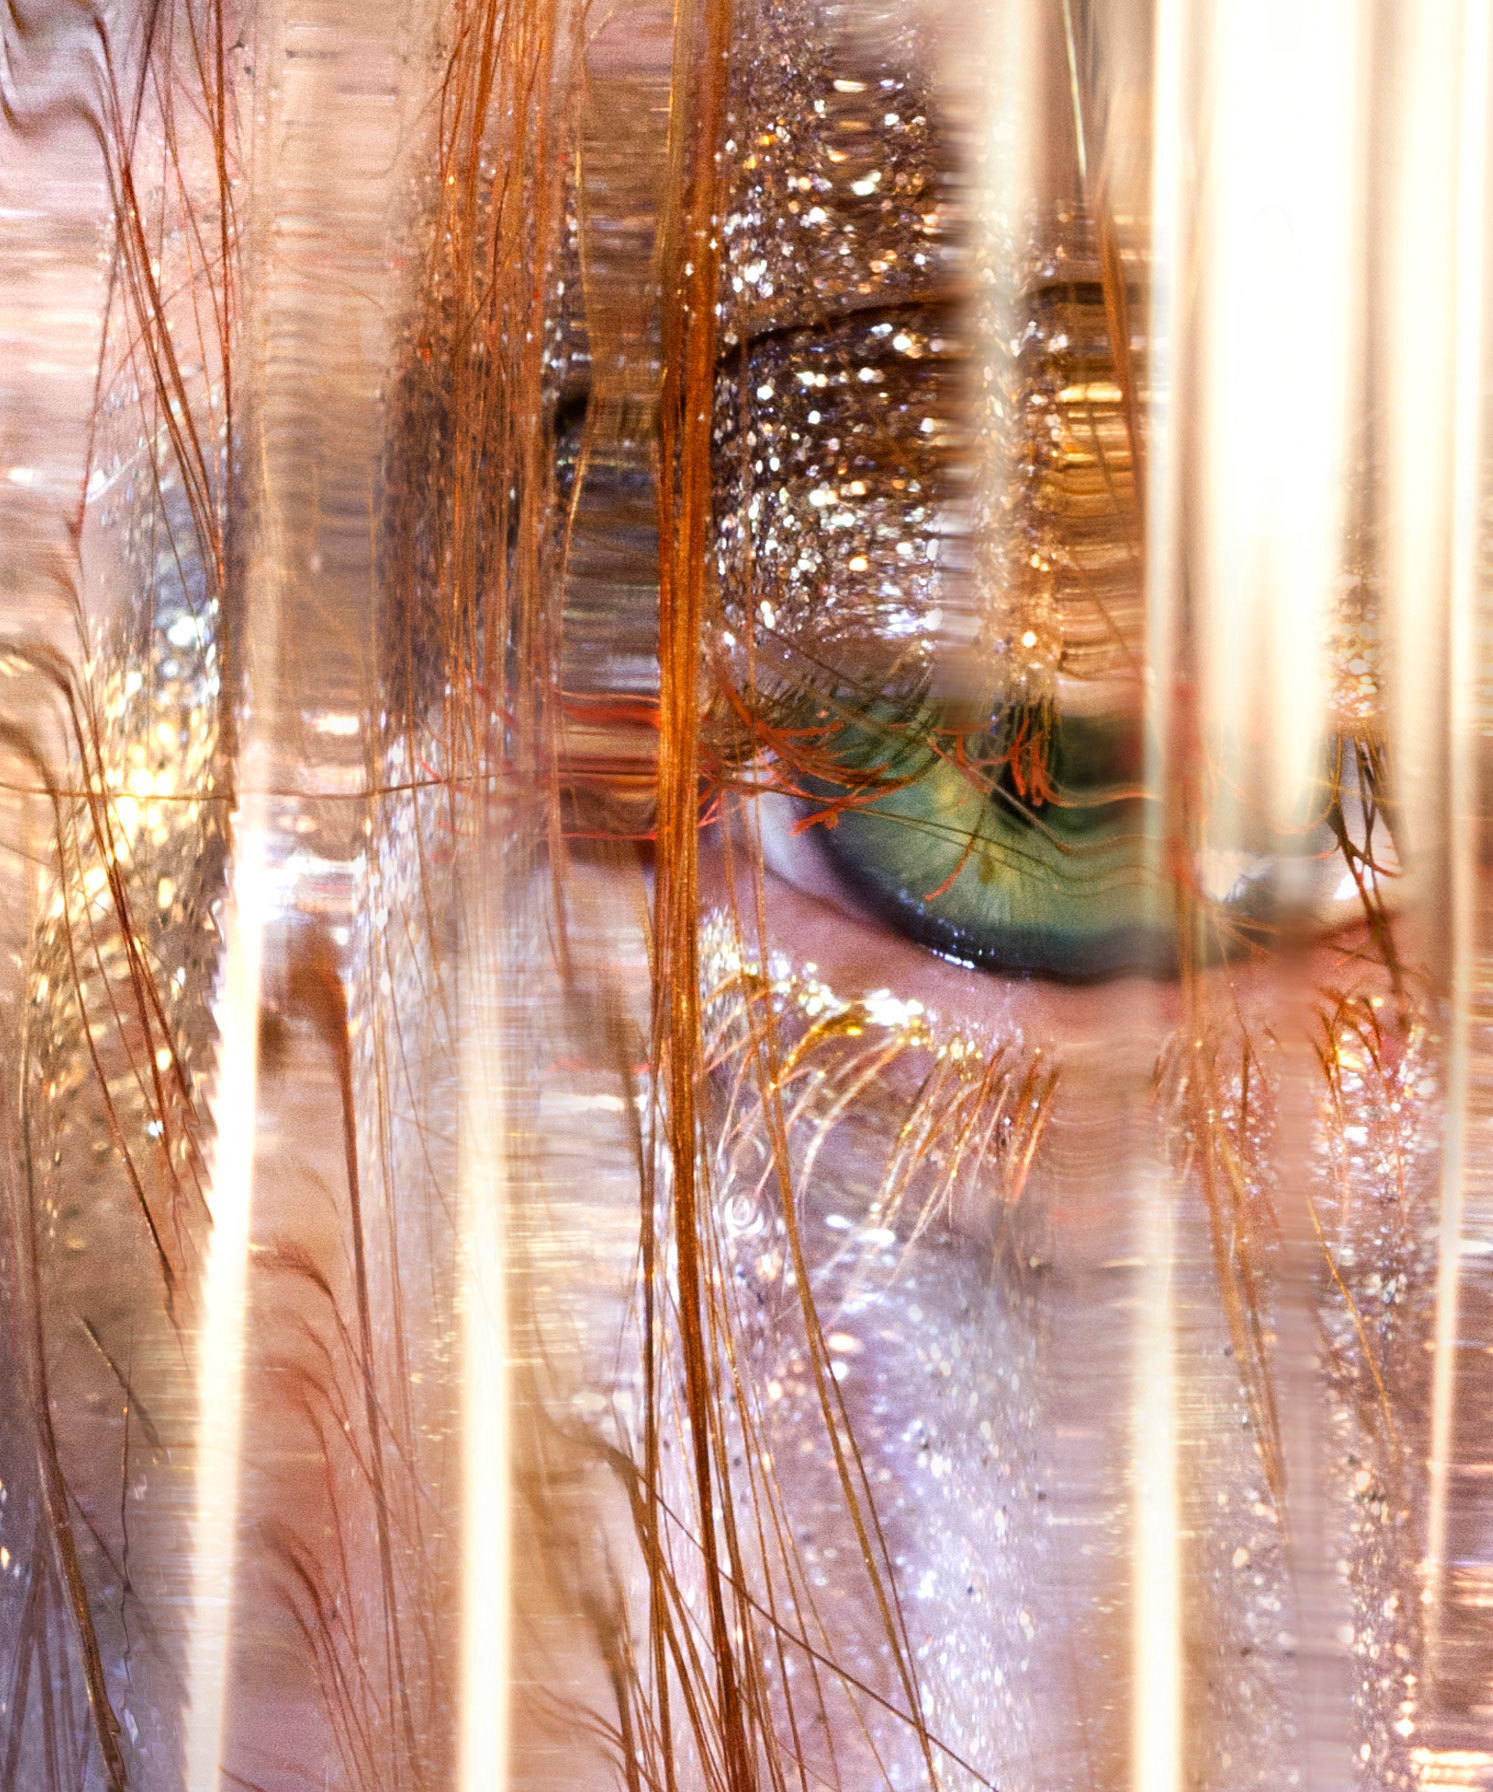 marilyn minter's art is literally filthy gorgeous